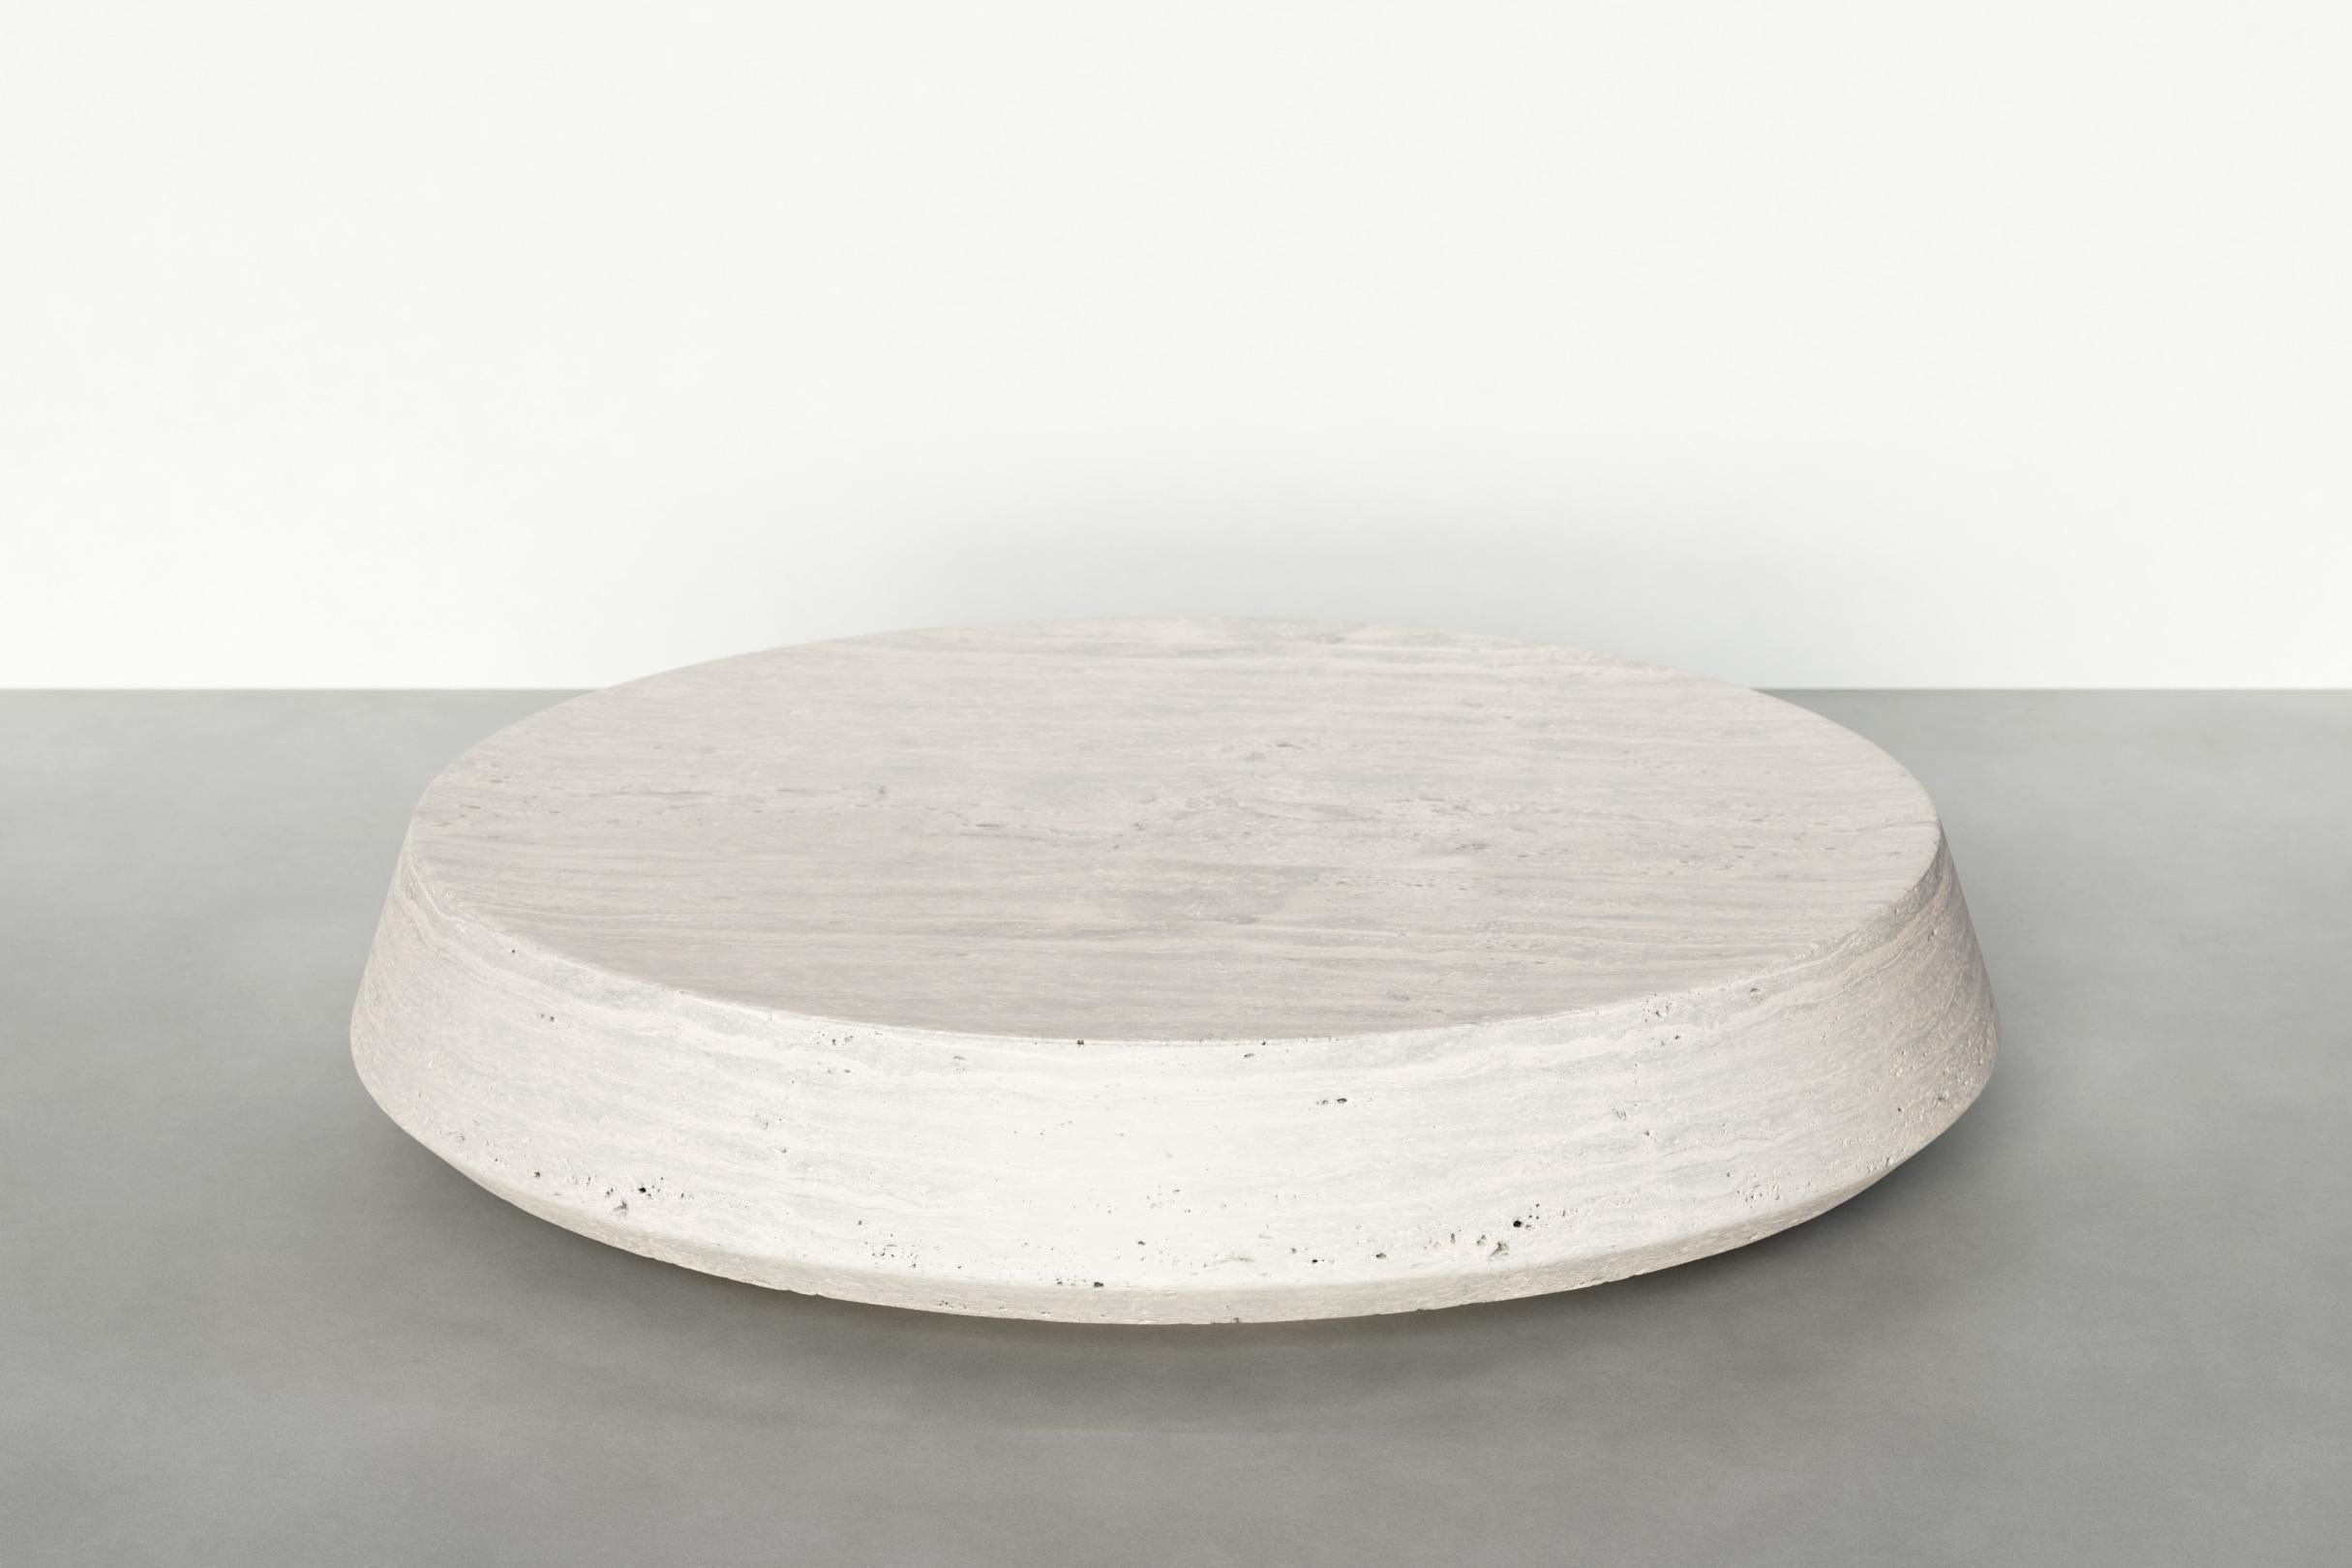 Timeless low table II by Maria Osminina
Limited Edition of 12
Dimensions: 95 x 95 x 20 cm
Materials: Travertino Romano

Timeless is a series of pieces of stone furniture in which the aesthetic vector is aimed at a deep sense of time as being. It is